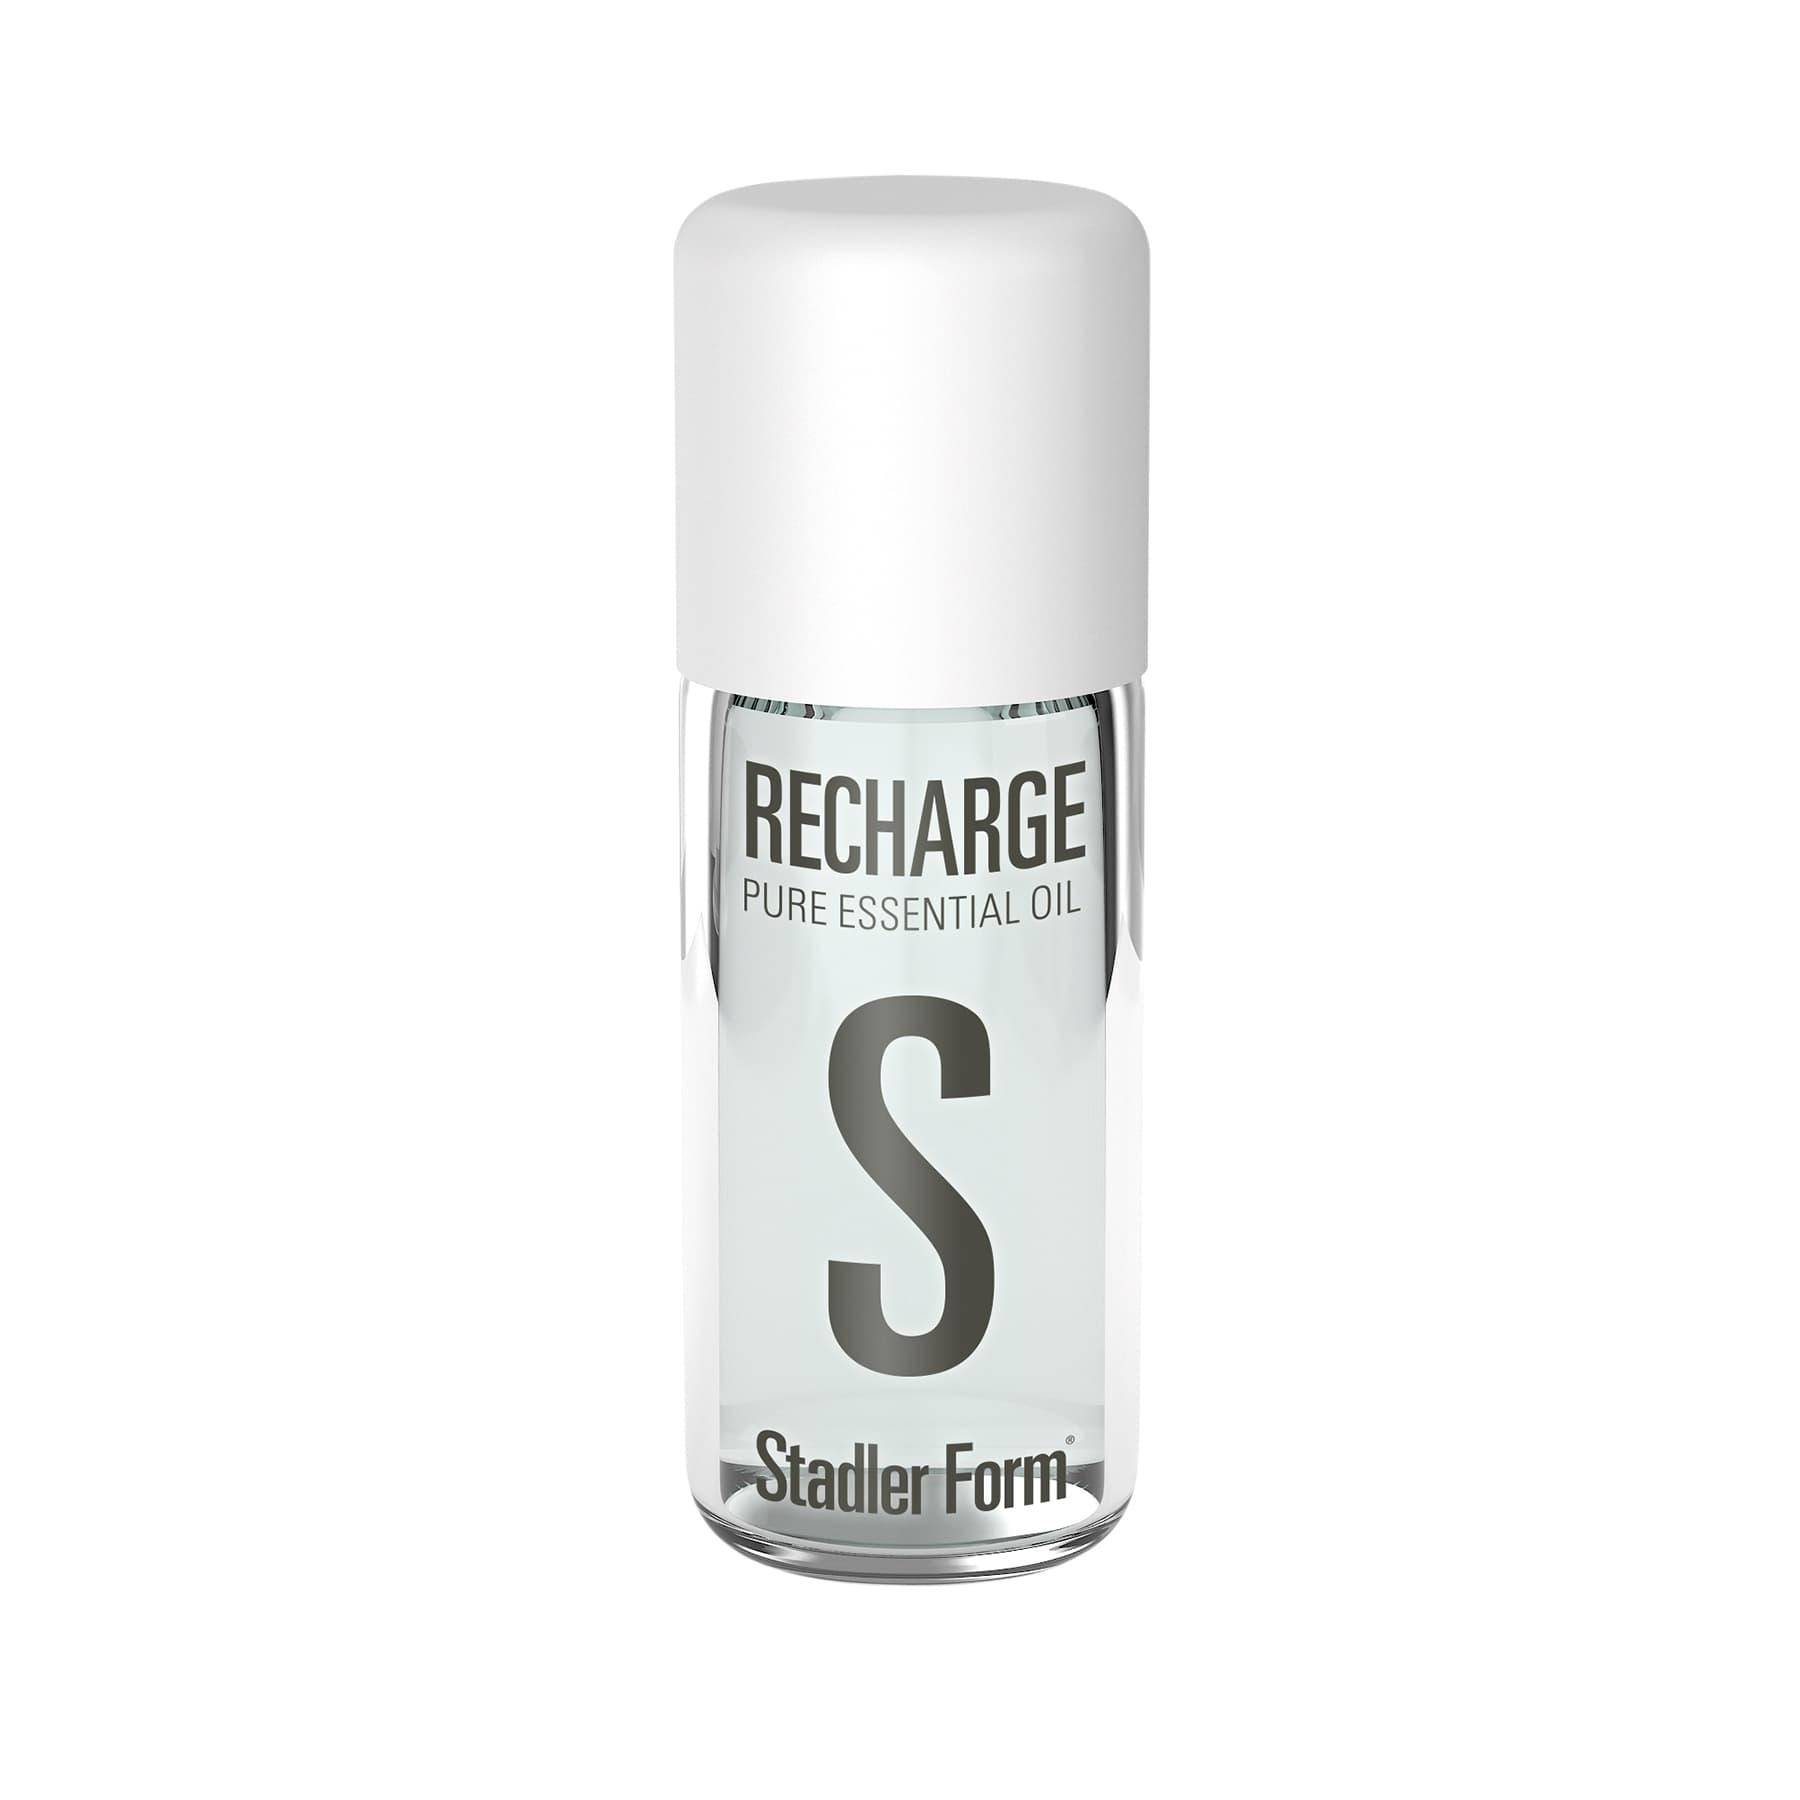 Essential Oil 10ml "Recharge"